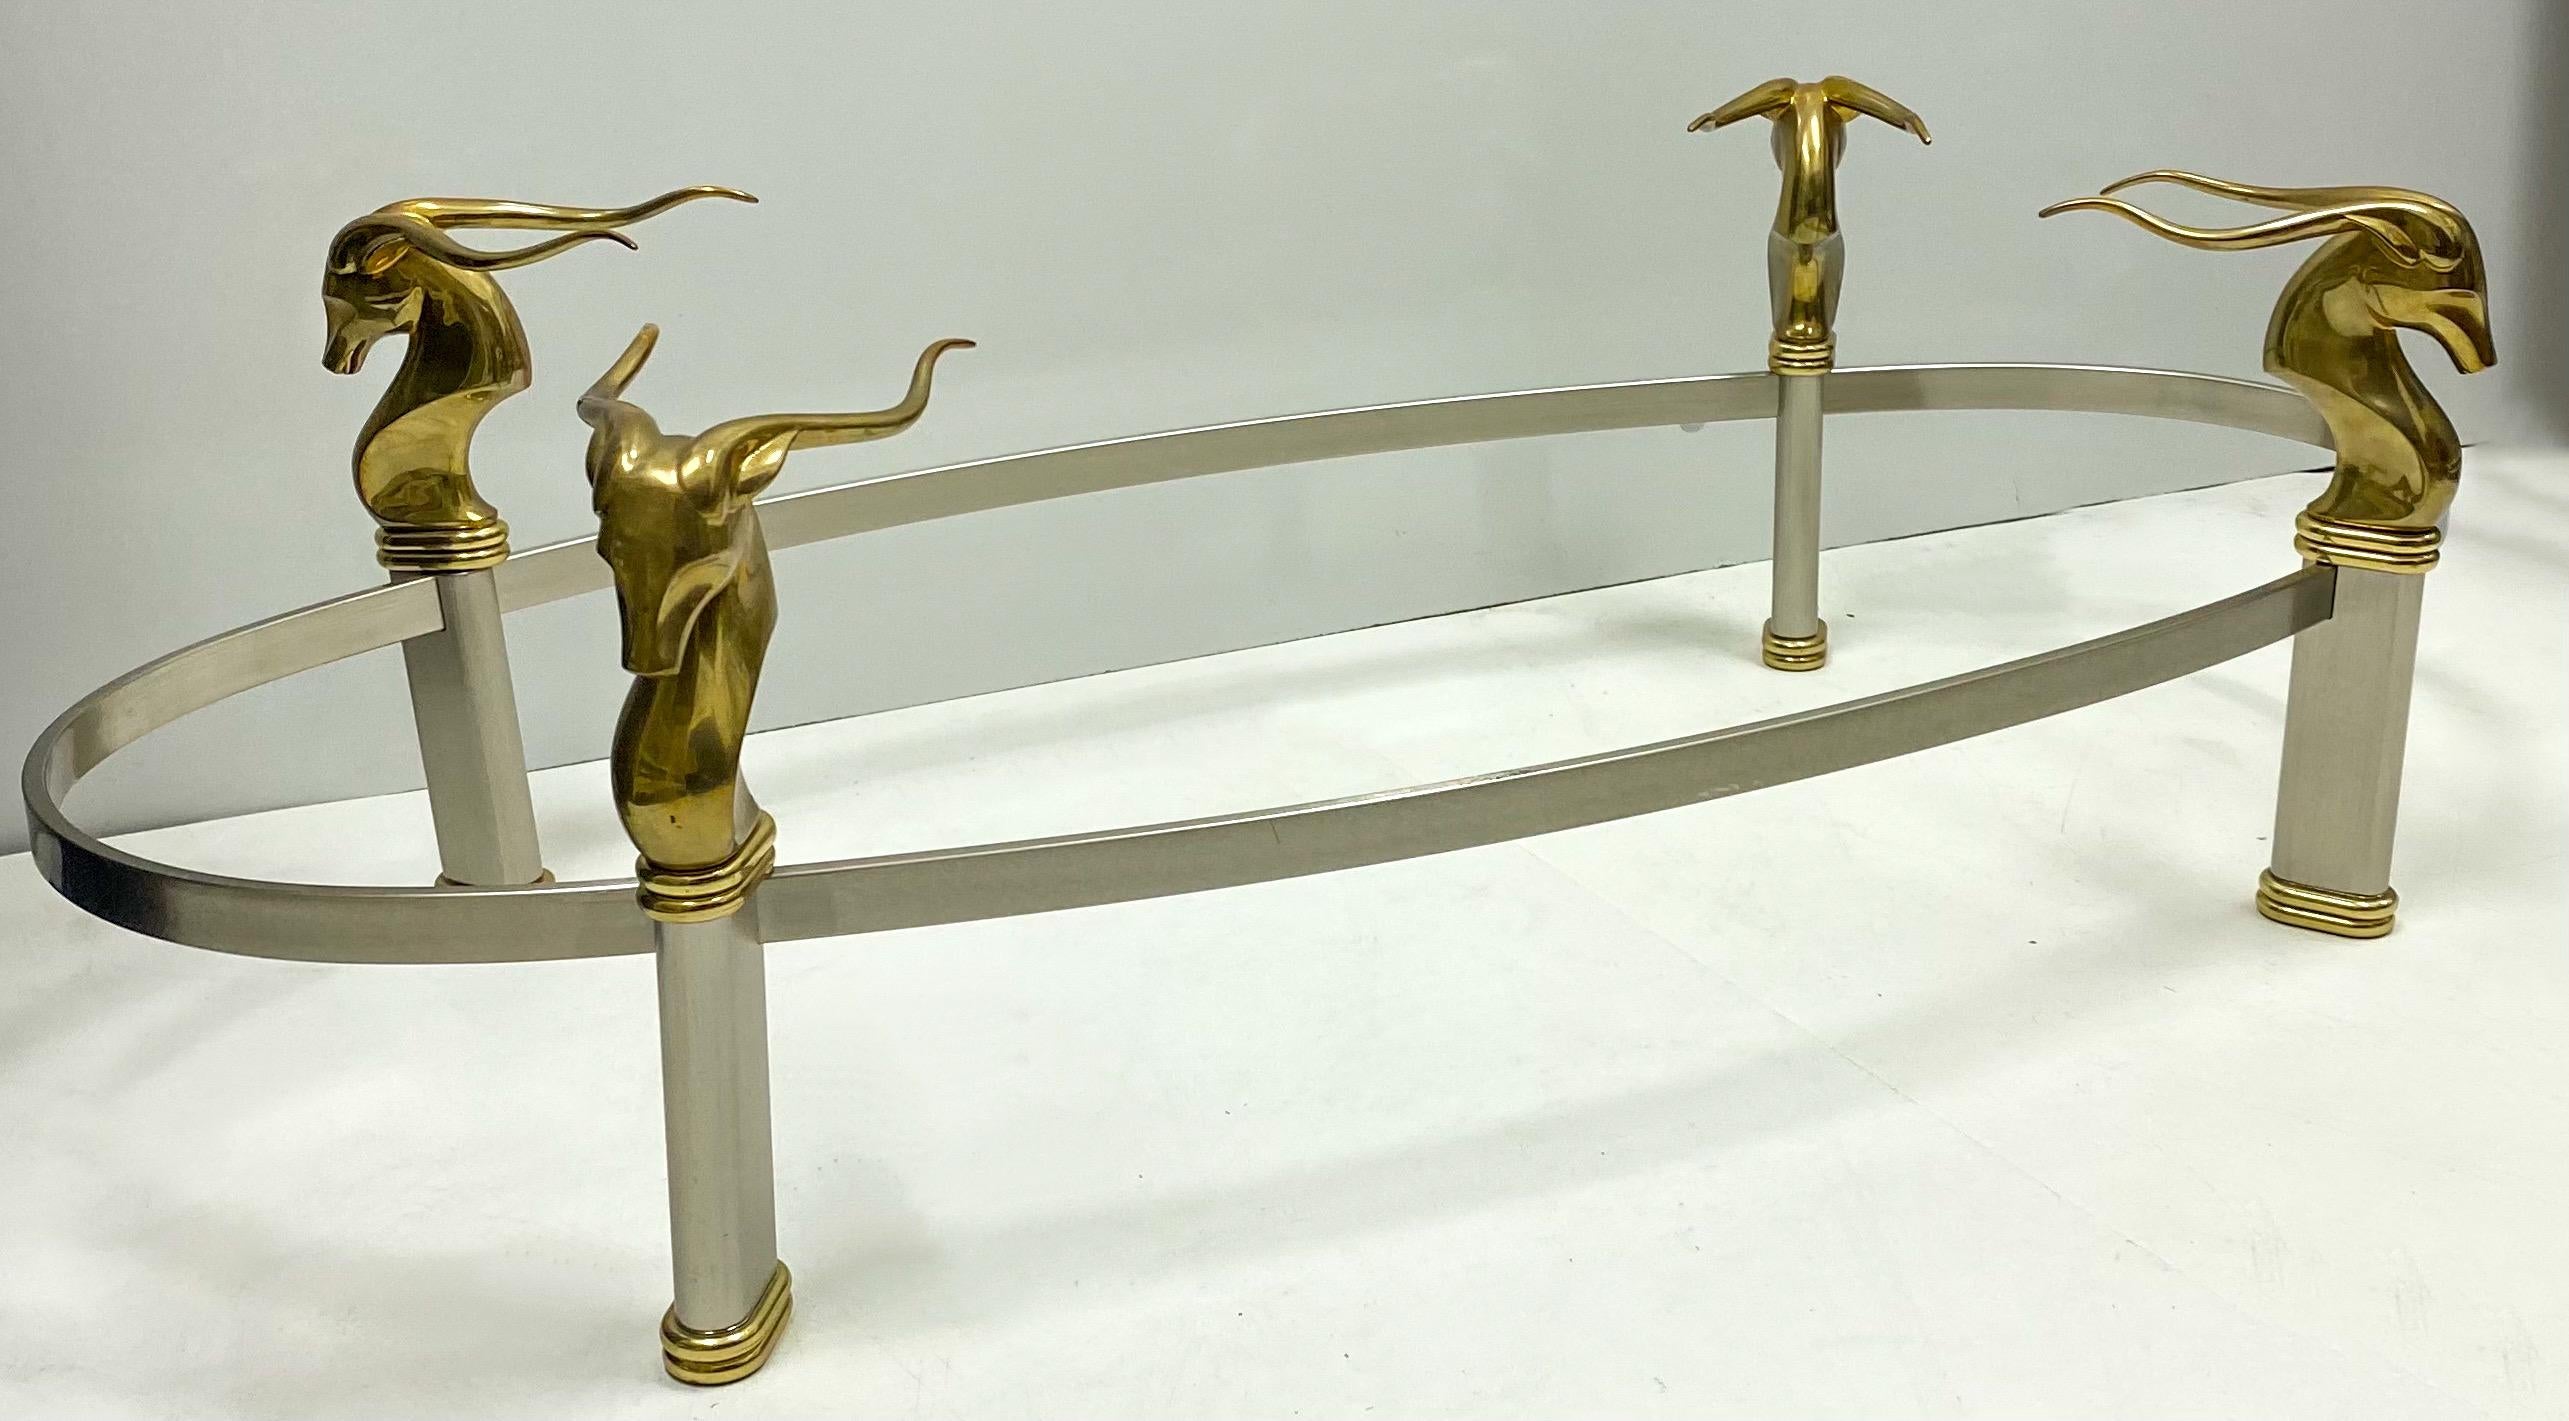 This is a modern interpretation of neoclassical styling with a sleek blend of brushed steel and brass and glass. The four supports are brass gazelles. The gazelles are connected by brush steel. This piece is unmarked and most likely dates to the